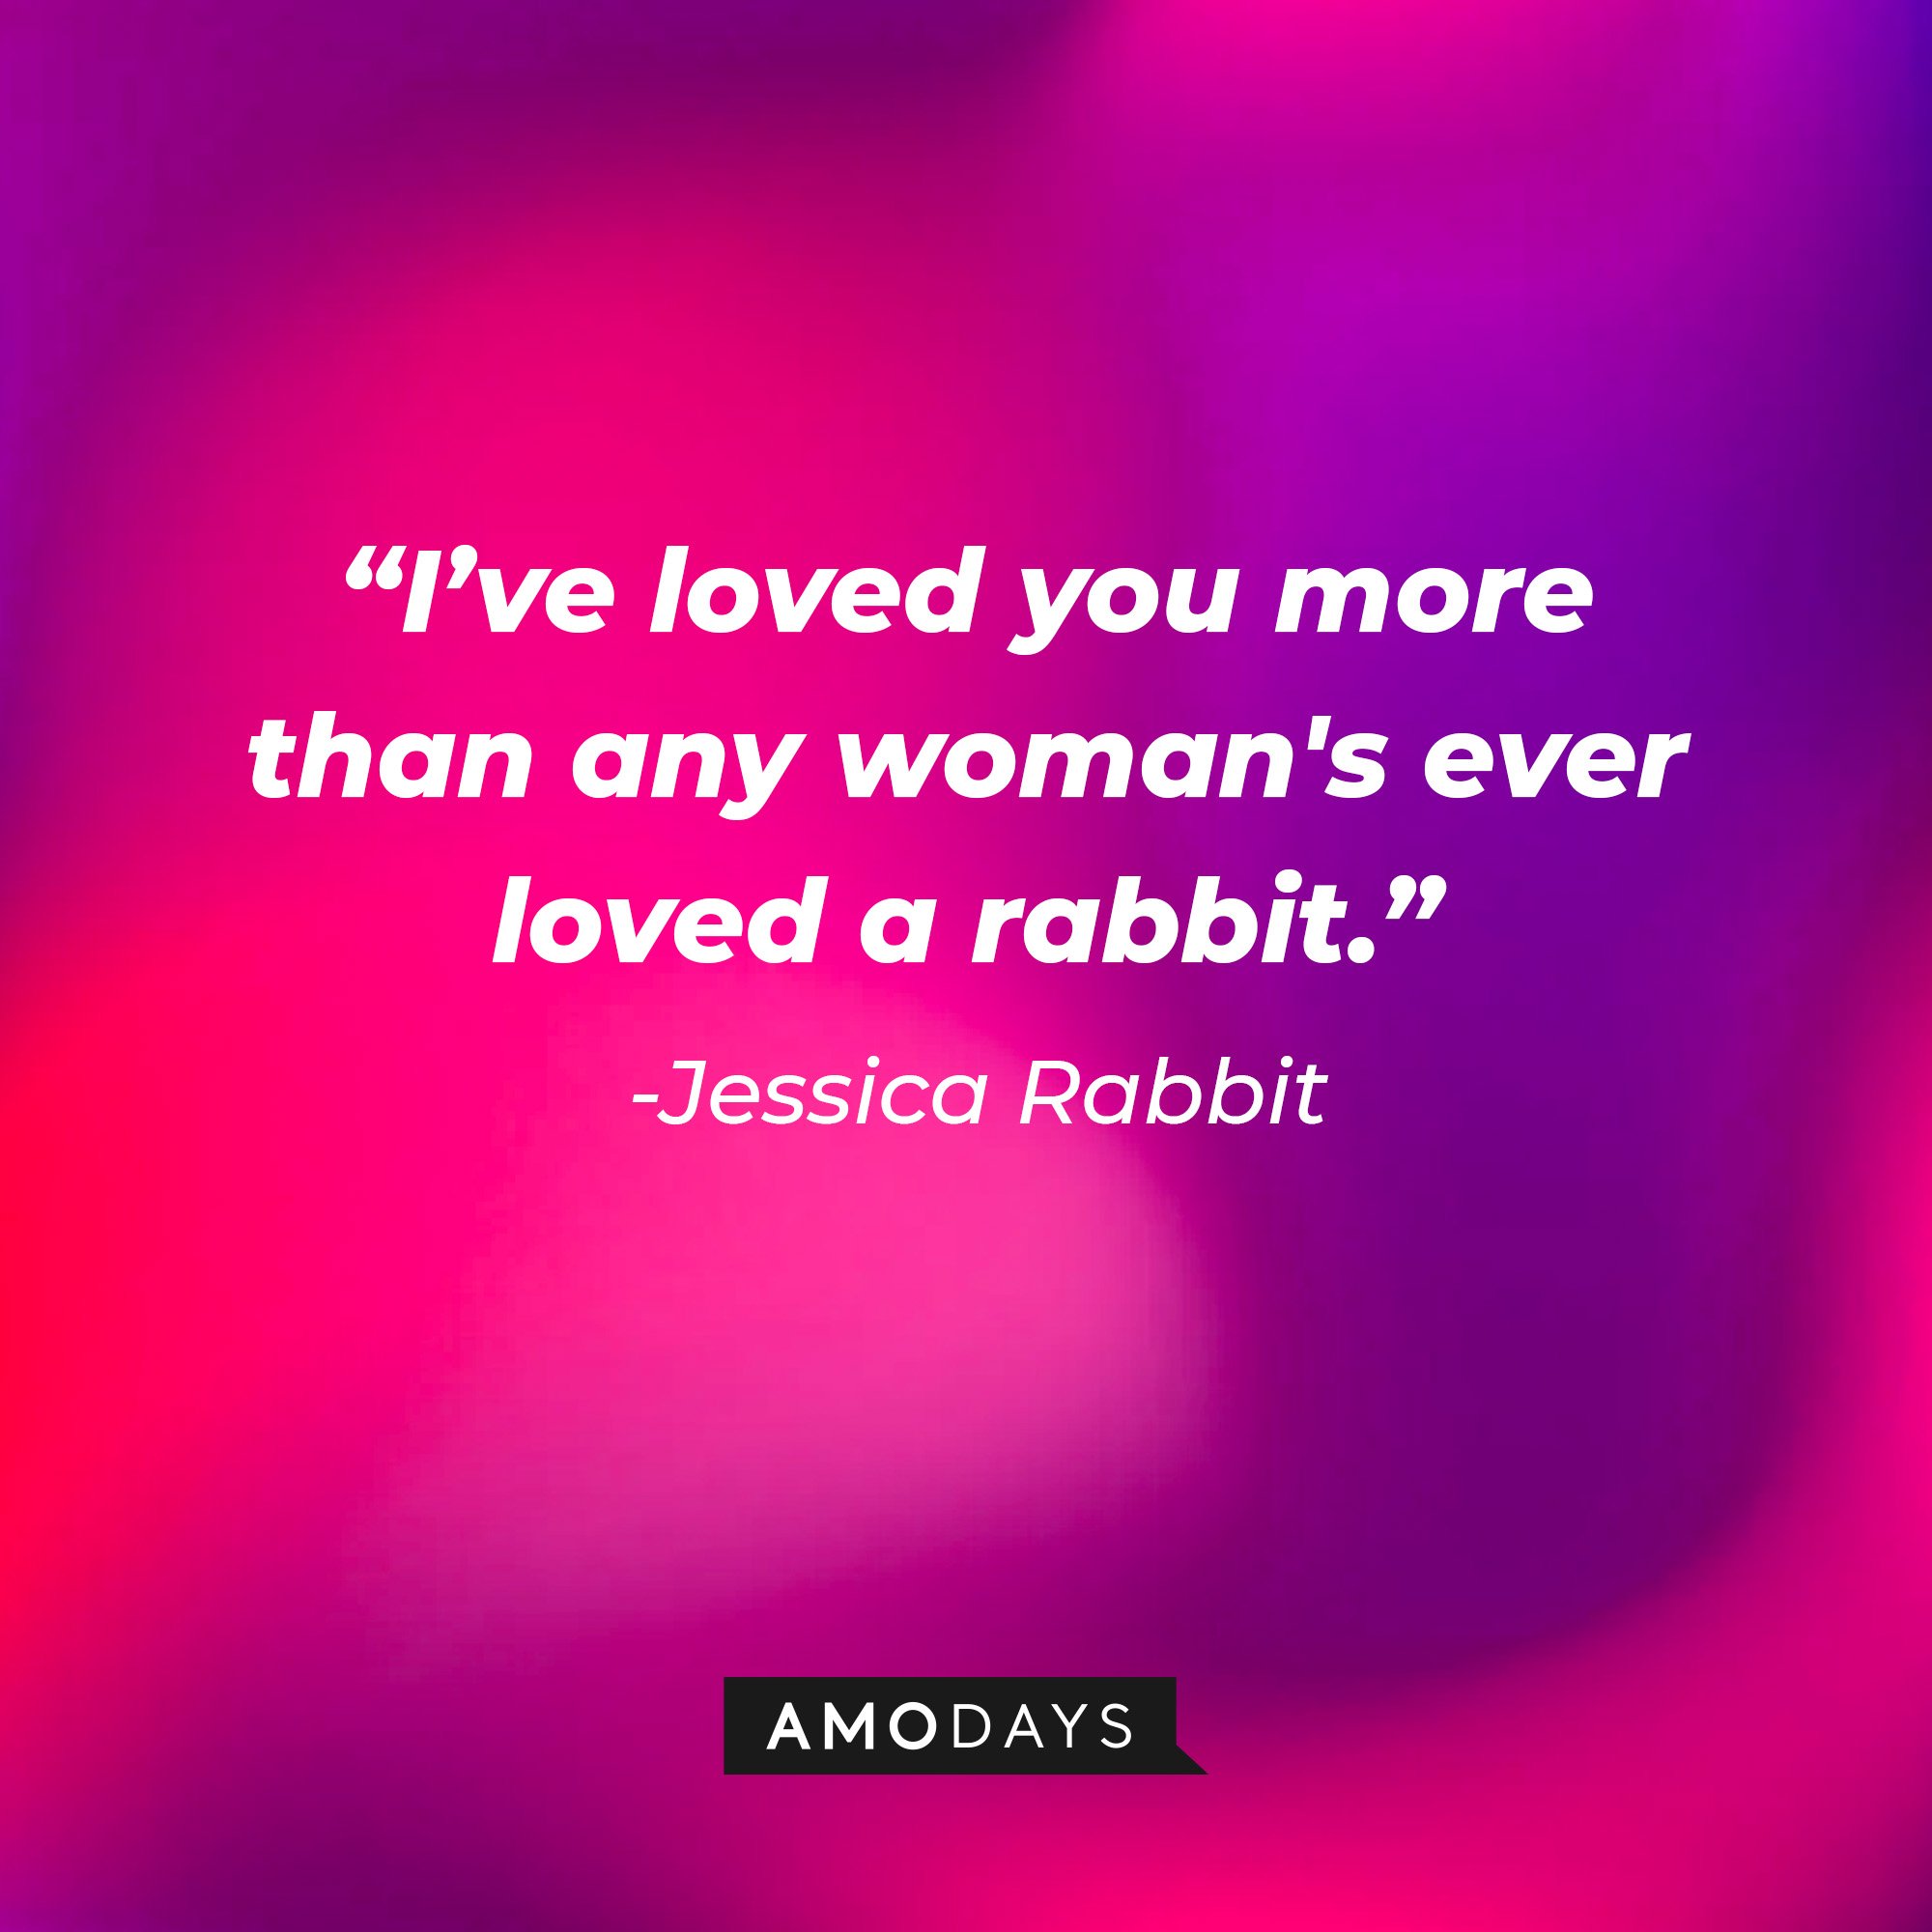 Jessica Rabbit’s quote: "I've loved you more than any woman's ever loved a rabbit." | Image: AmoDays